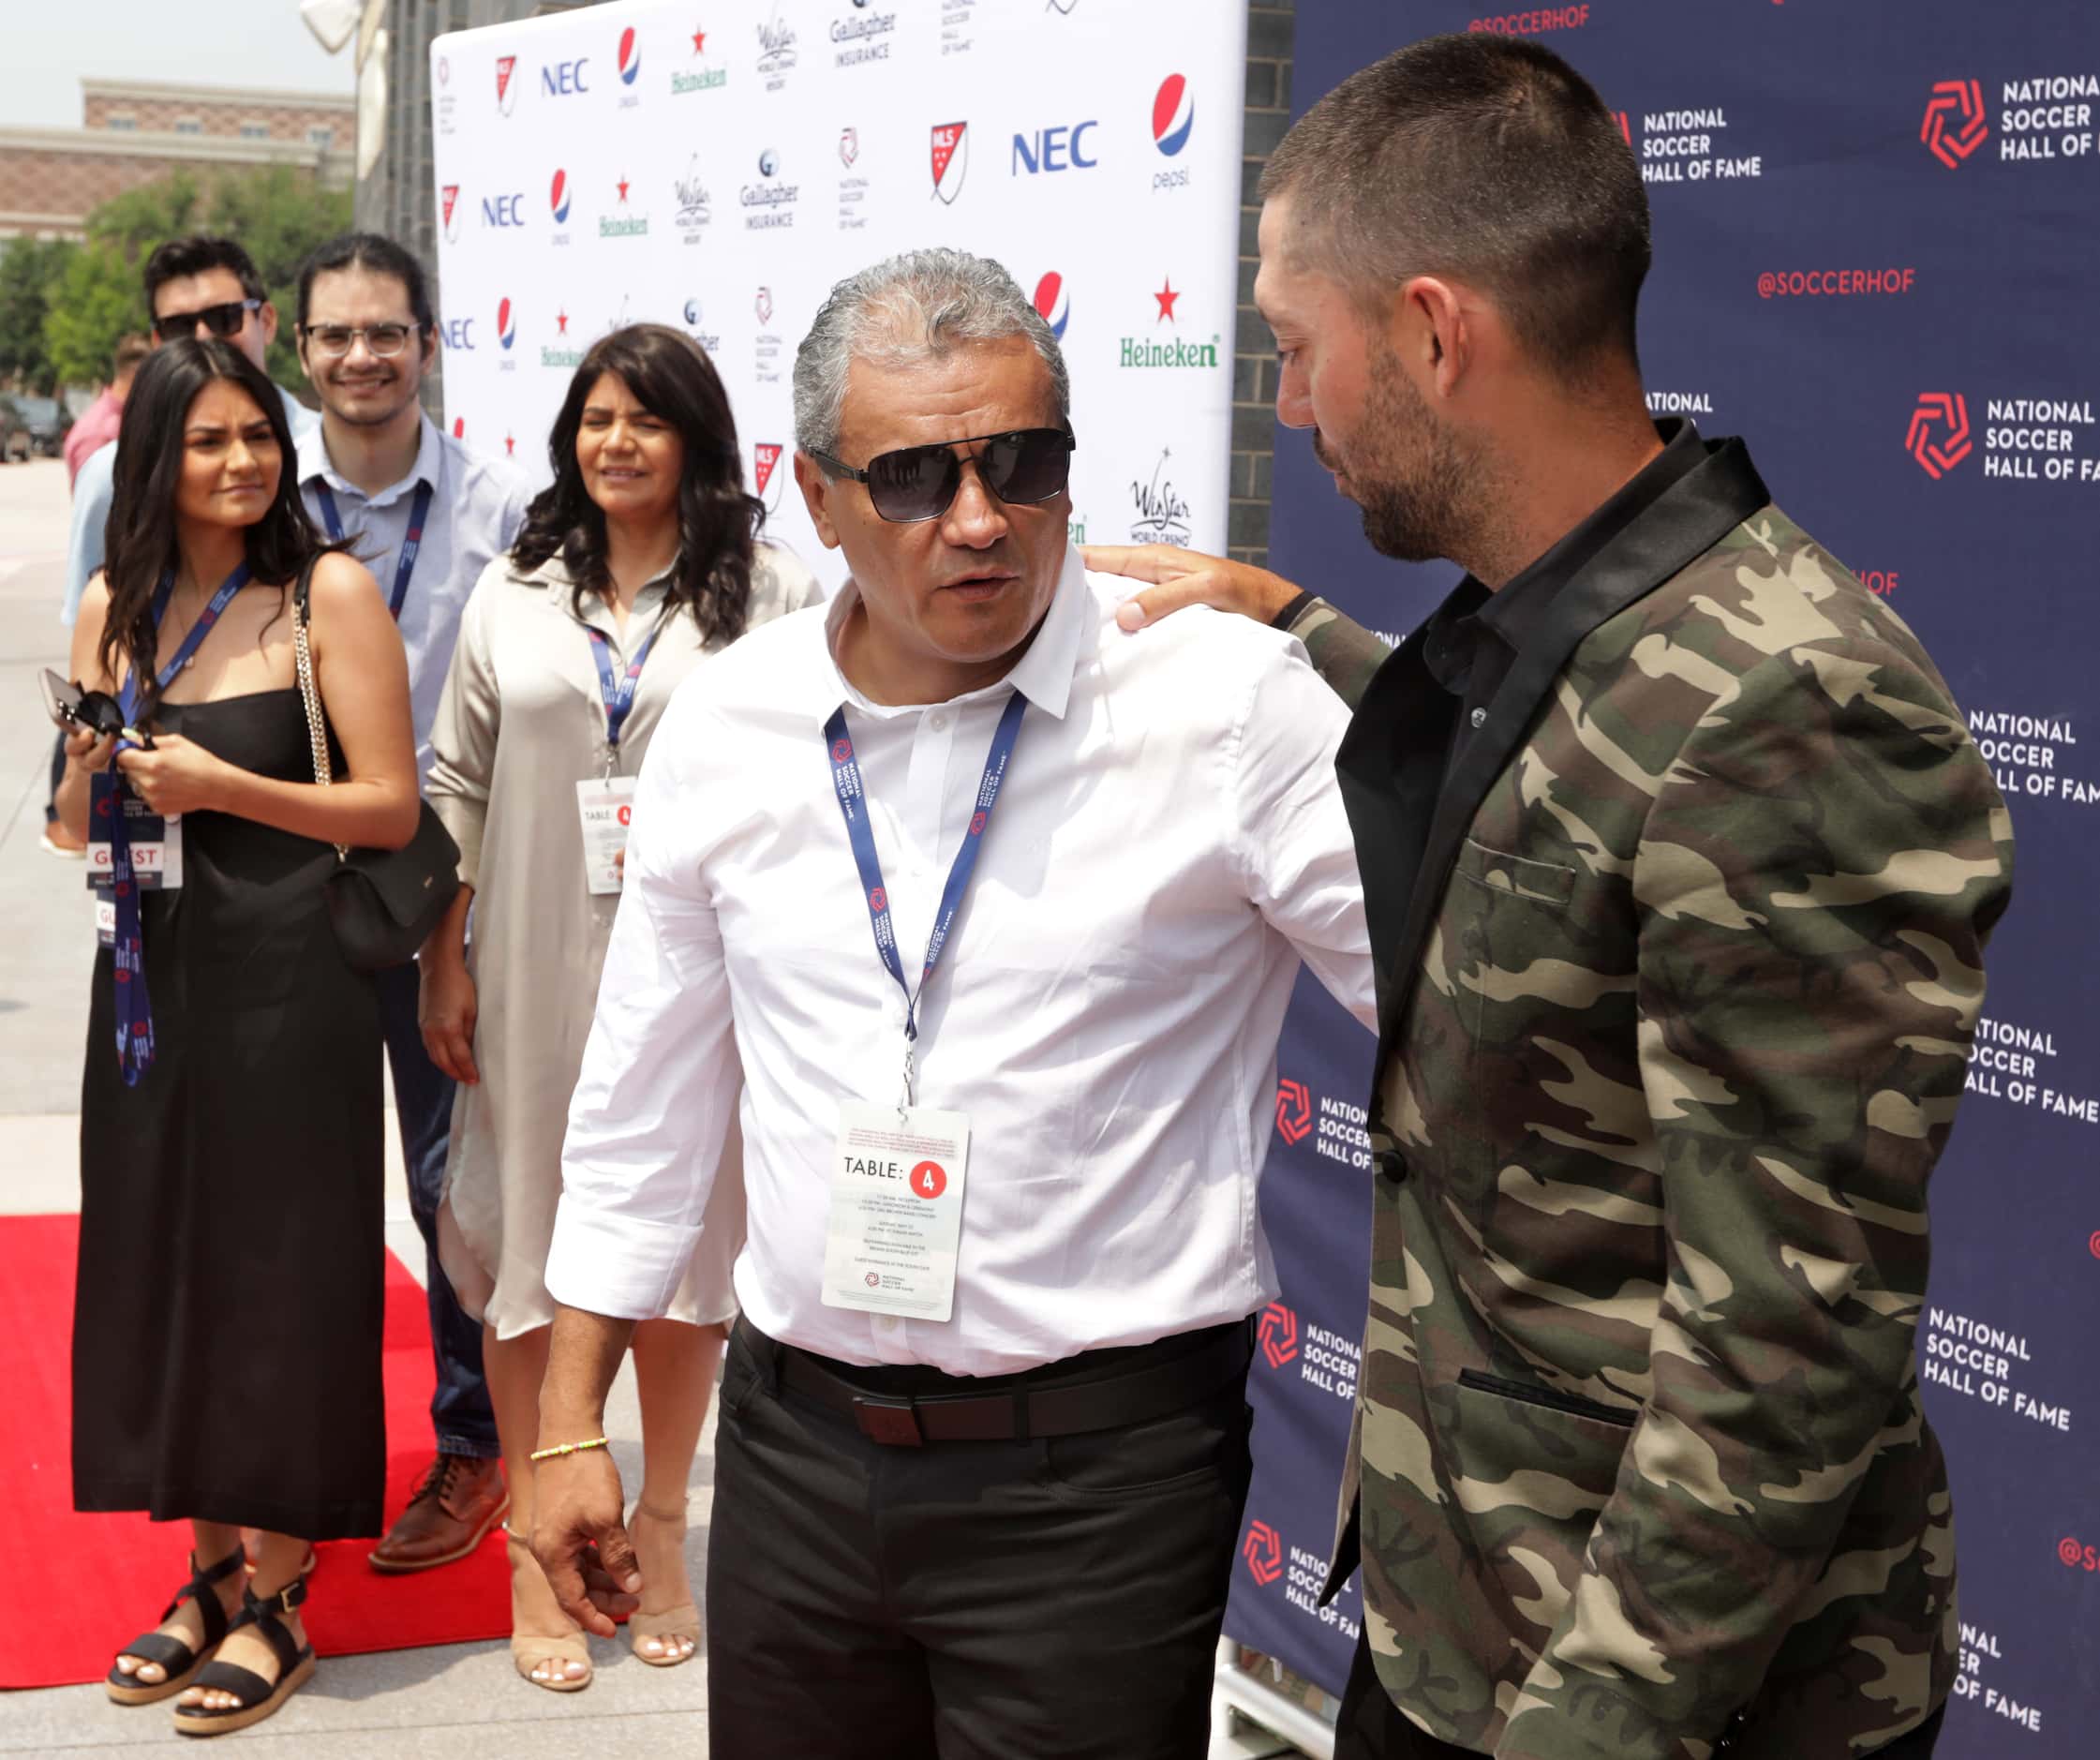 Marco Etcheverrycenter, shares a moment with Clint Dempsey, right, on the red carpet during...